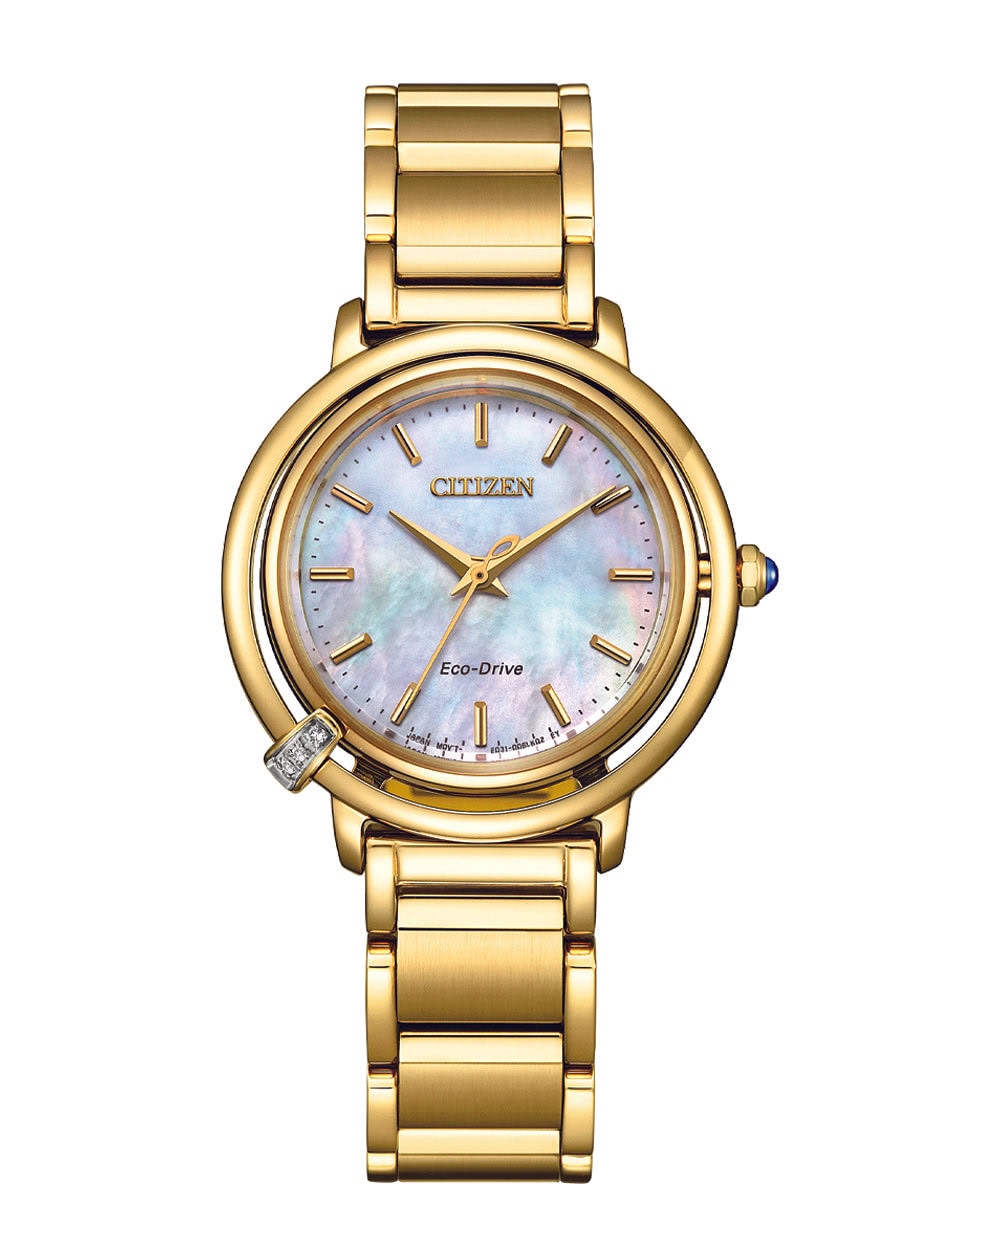 Citizen Gold Ladies Watch Eco-Drive Stainless Steel Case Mother of Pearl Dial 31mm Case Stainless Steel Bracelet, Push Button Buckle Band Sapphire Crystal Glass 50 Meter Water Resistant Classic lines and hints of romance make this newest piece to our ladies' collection; the Citizen L Arising is a glamorous addition. Inspired by the sunrise, this watch features a sleek design that combines the gentle, curving lines of the stainless-steel case with lustrous mother-of-pearl dial to showcase the delicate beauty of the sunrise itself. Continuing to provide sustainable watches, the Citizen L collection uses the elegant designs to reflect the beauty of the planet while evoking the feelings of joy and happiness every time you look at your wrist.Special features also include a 3 set diamond at the 7 o'clock postion, representing the the appearence of the first flash of dawn and extra strap._0